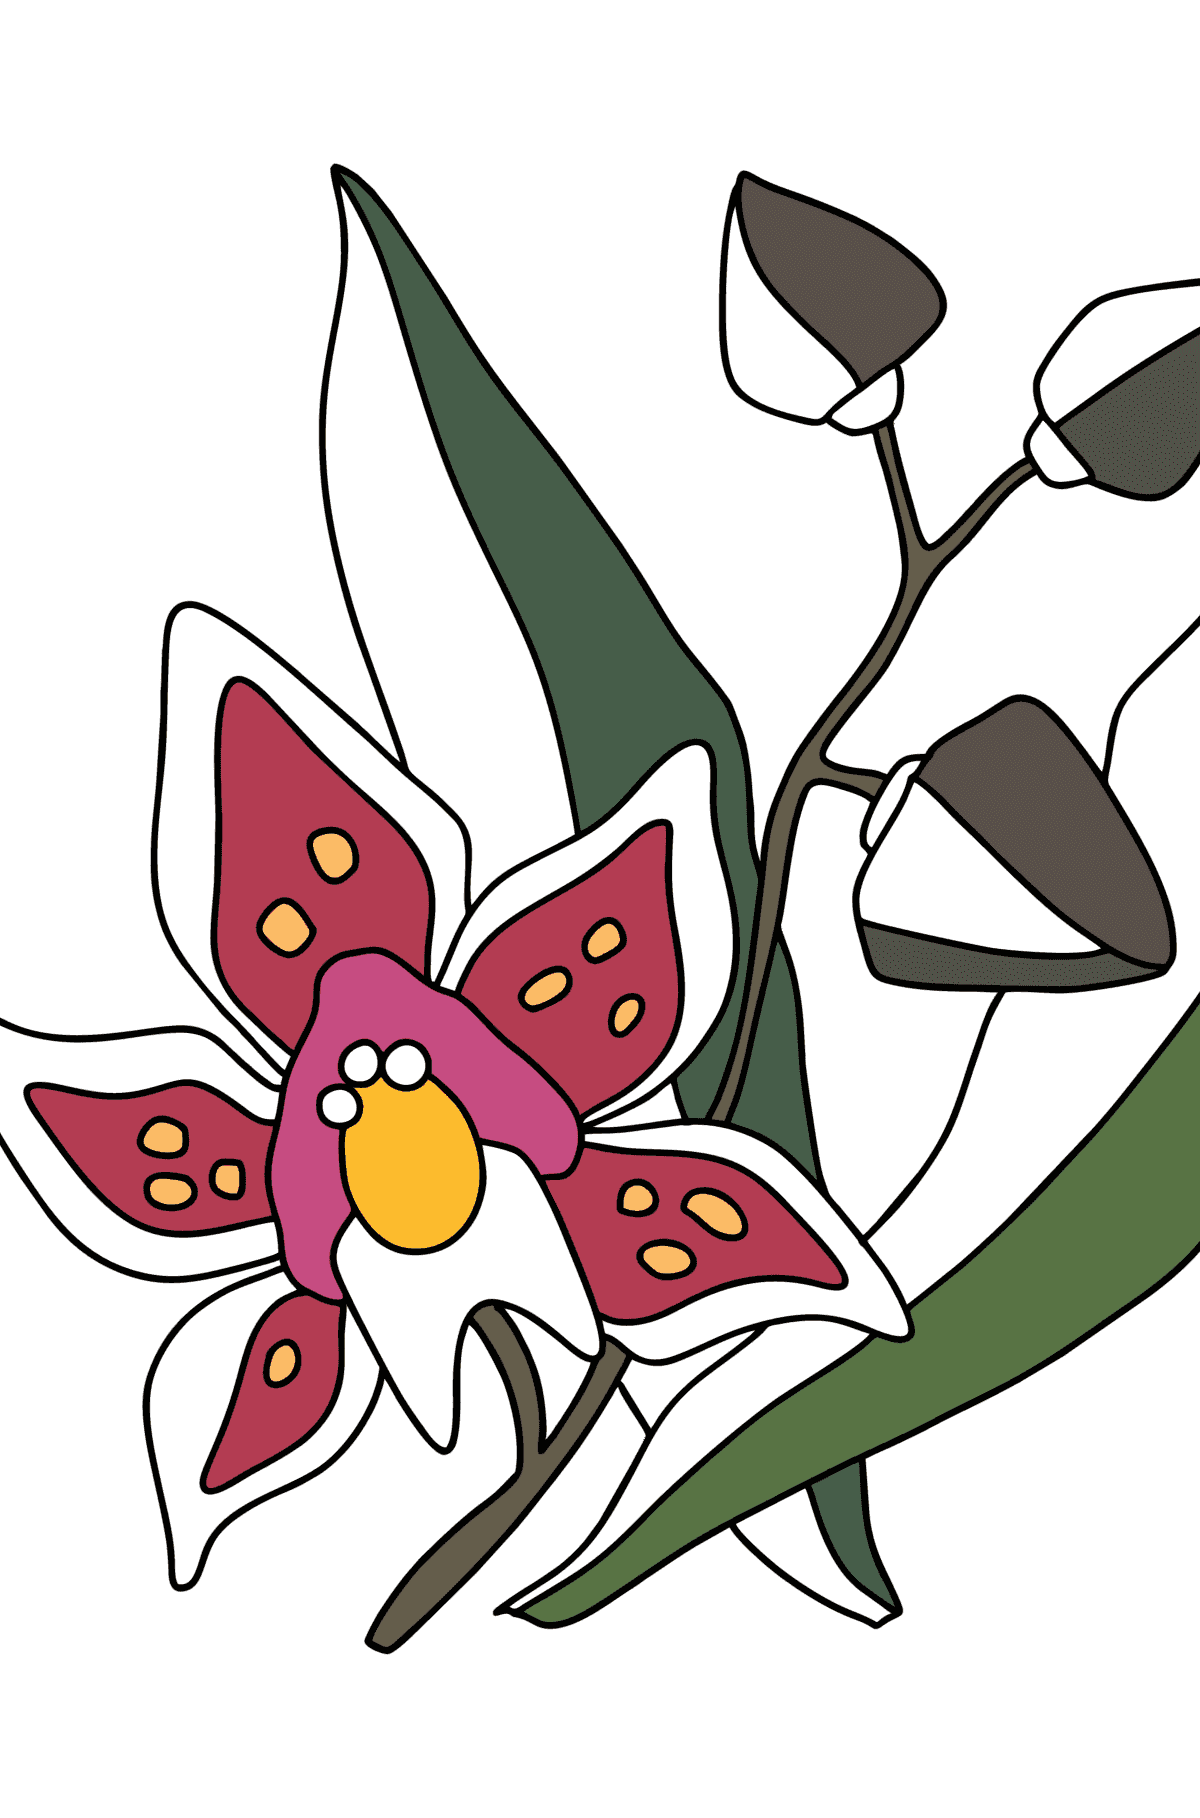 Orchid coloring page - Coloring Pages for Kids